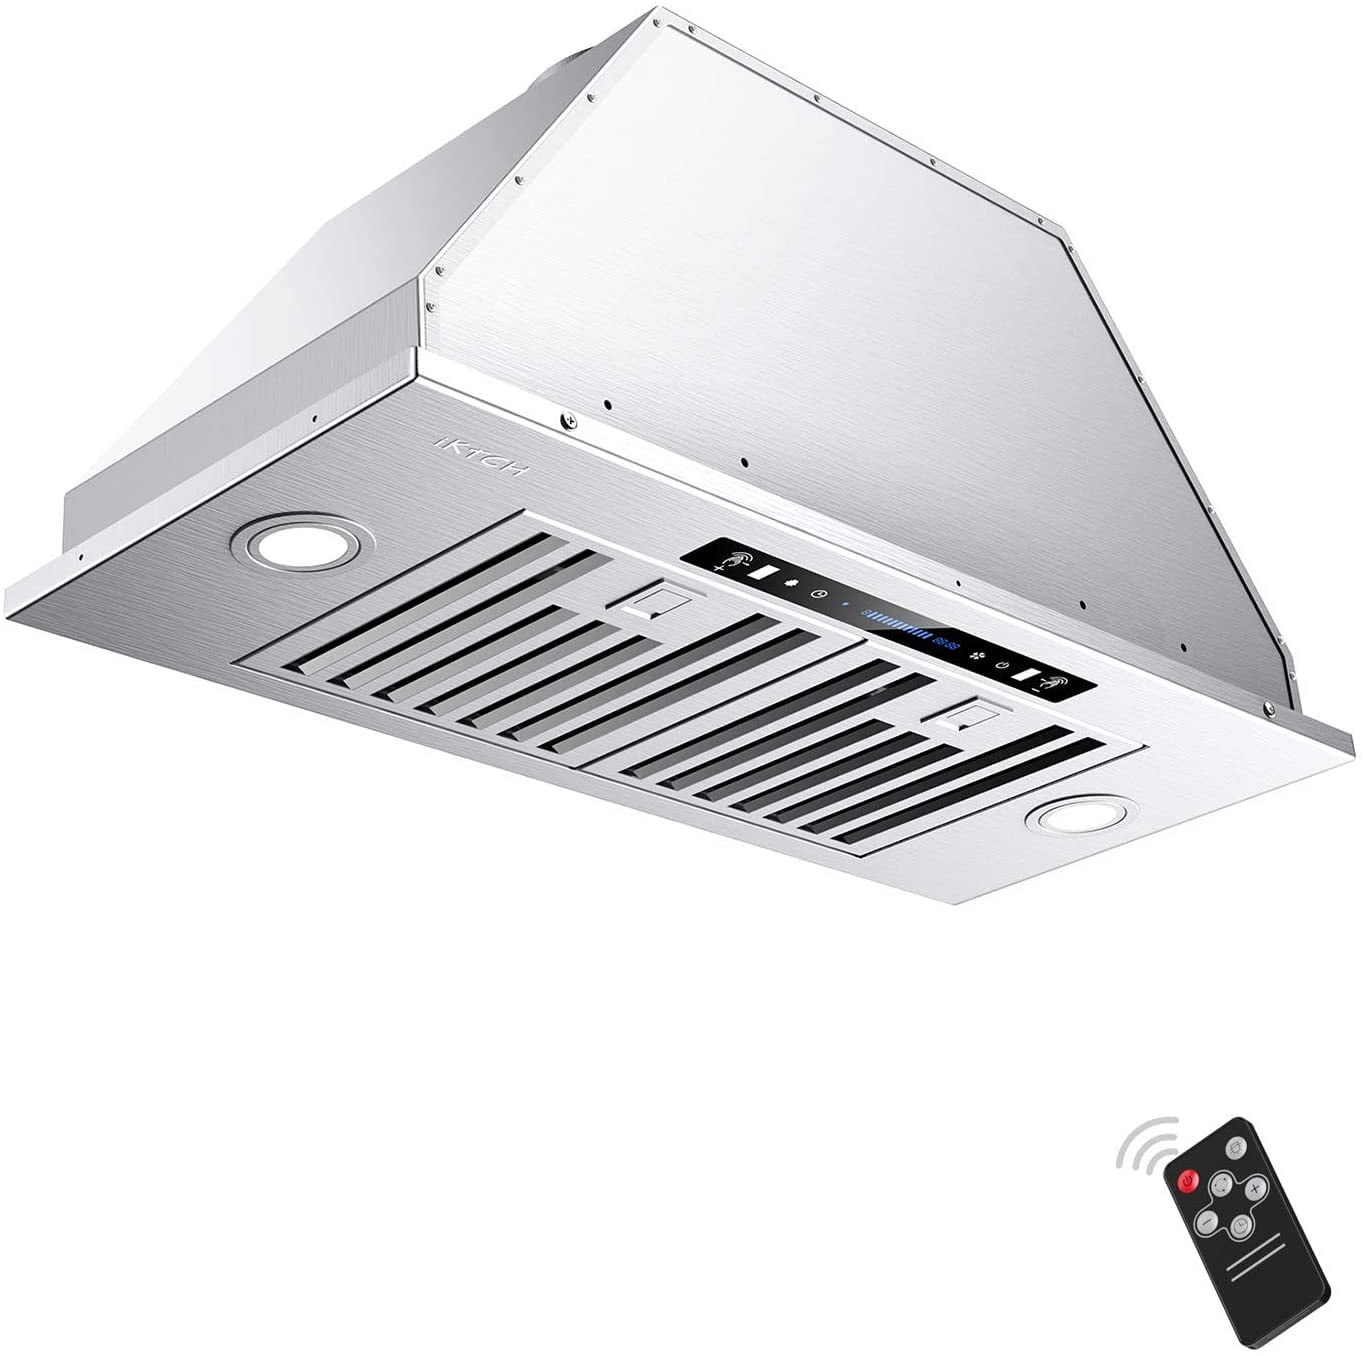 Stainless Steel Kitchen Vent Hood with 4 speed & Touch Control,2 Pcs Adjustable Lights and 3 Pcs Baffle Filters,Ducted/Ductless Convertible Duct Iamsii built-in insert Range Hood 36 inch 900CFM 